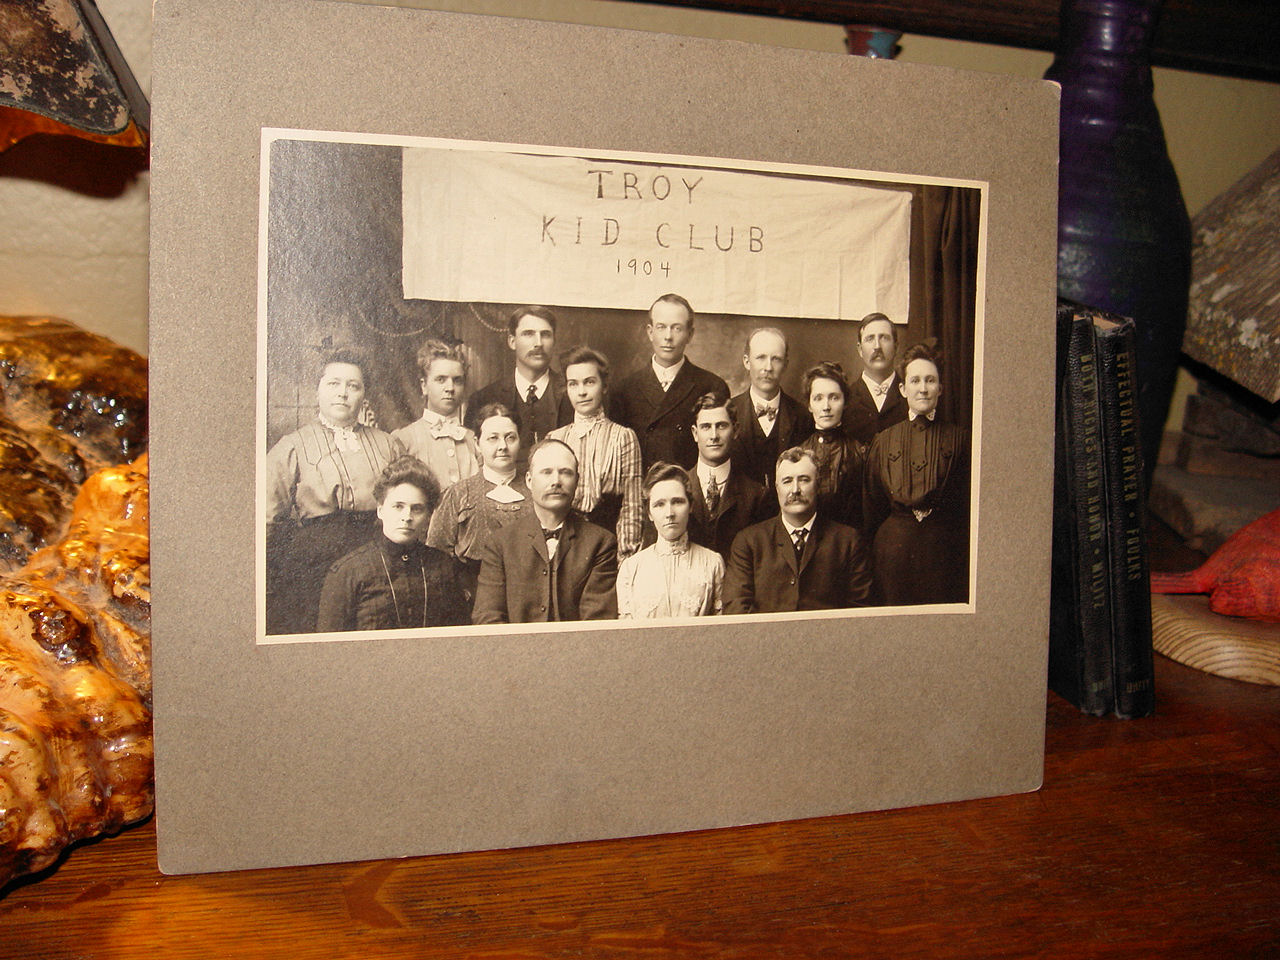 1904 Troy Kid Club Mich,
                                        MO, or NY - Lrg Cabinet
                                        photograph